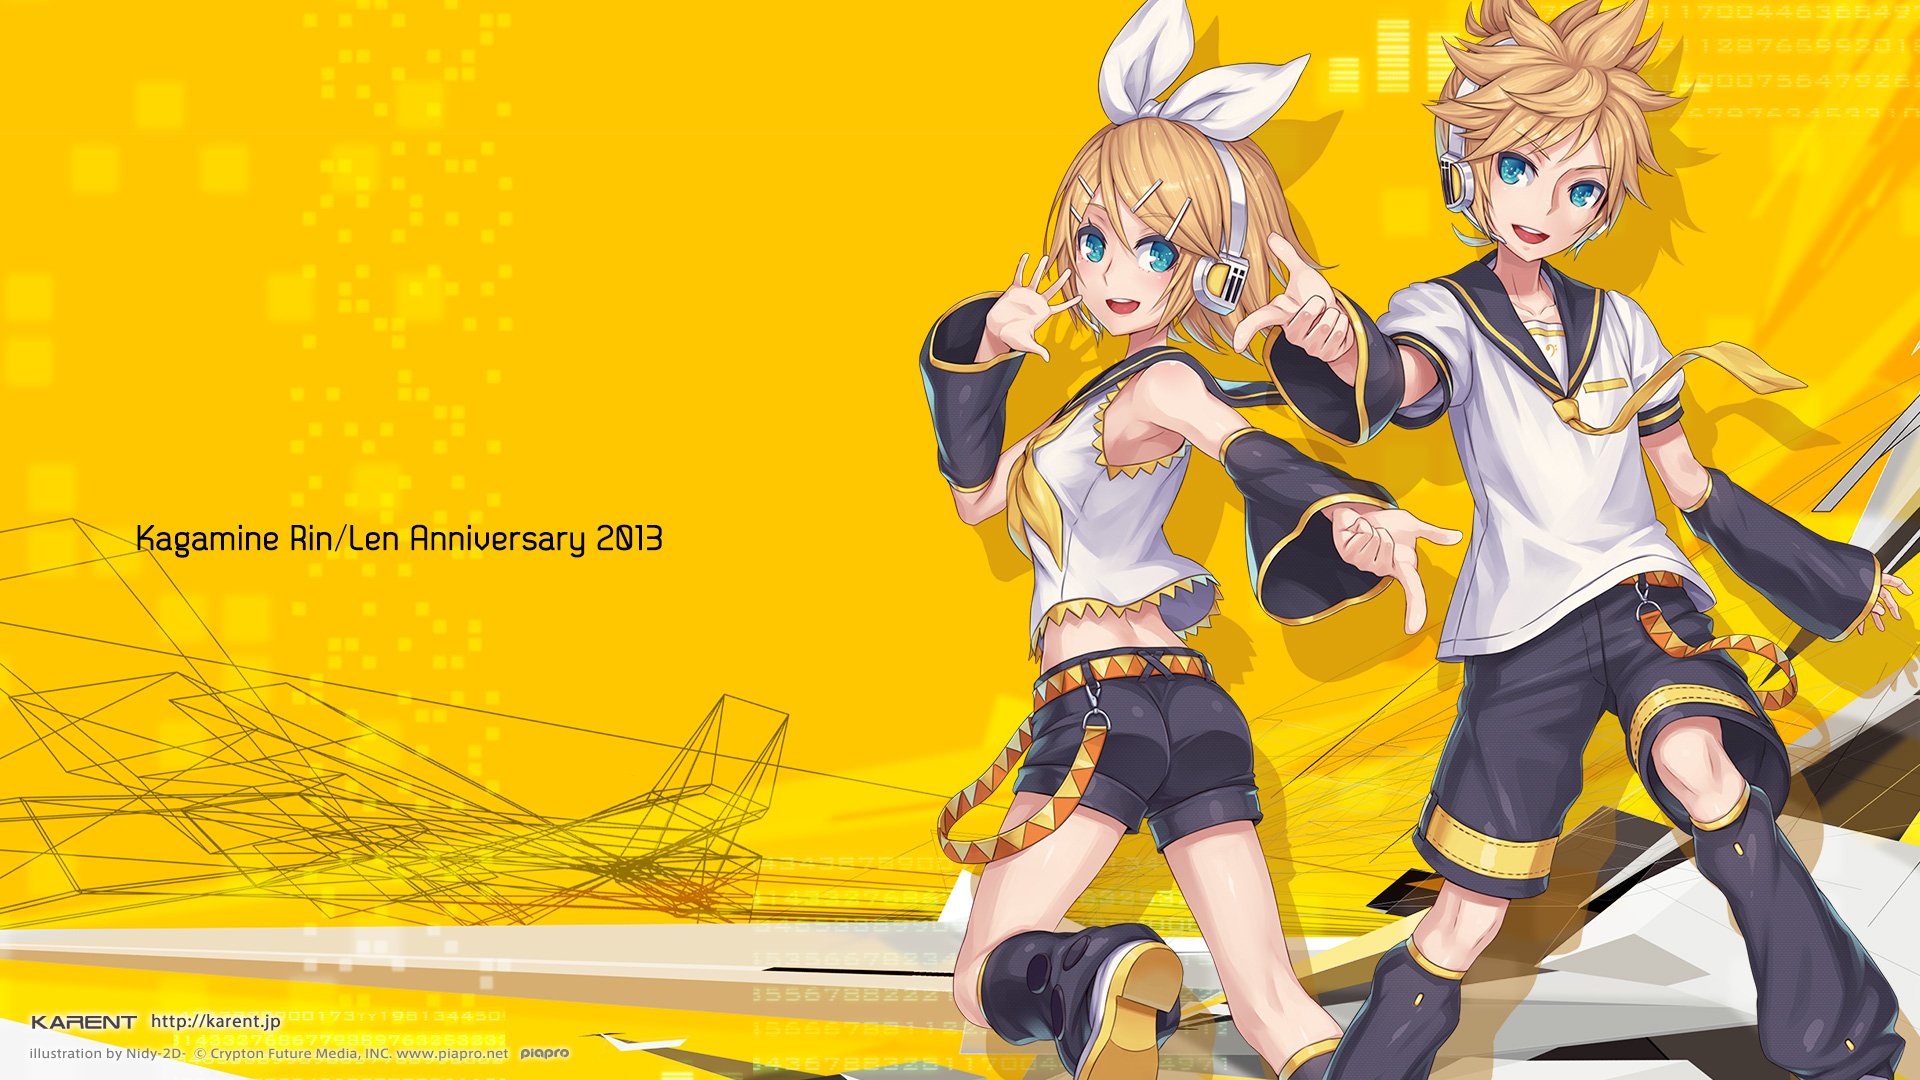 2. "Kagamine Len" from Vocaloid - wide 2